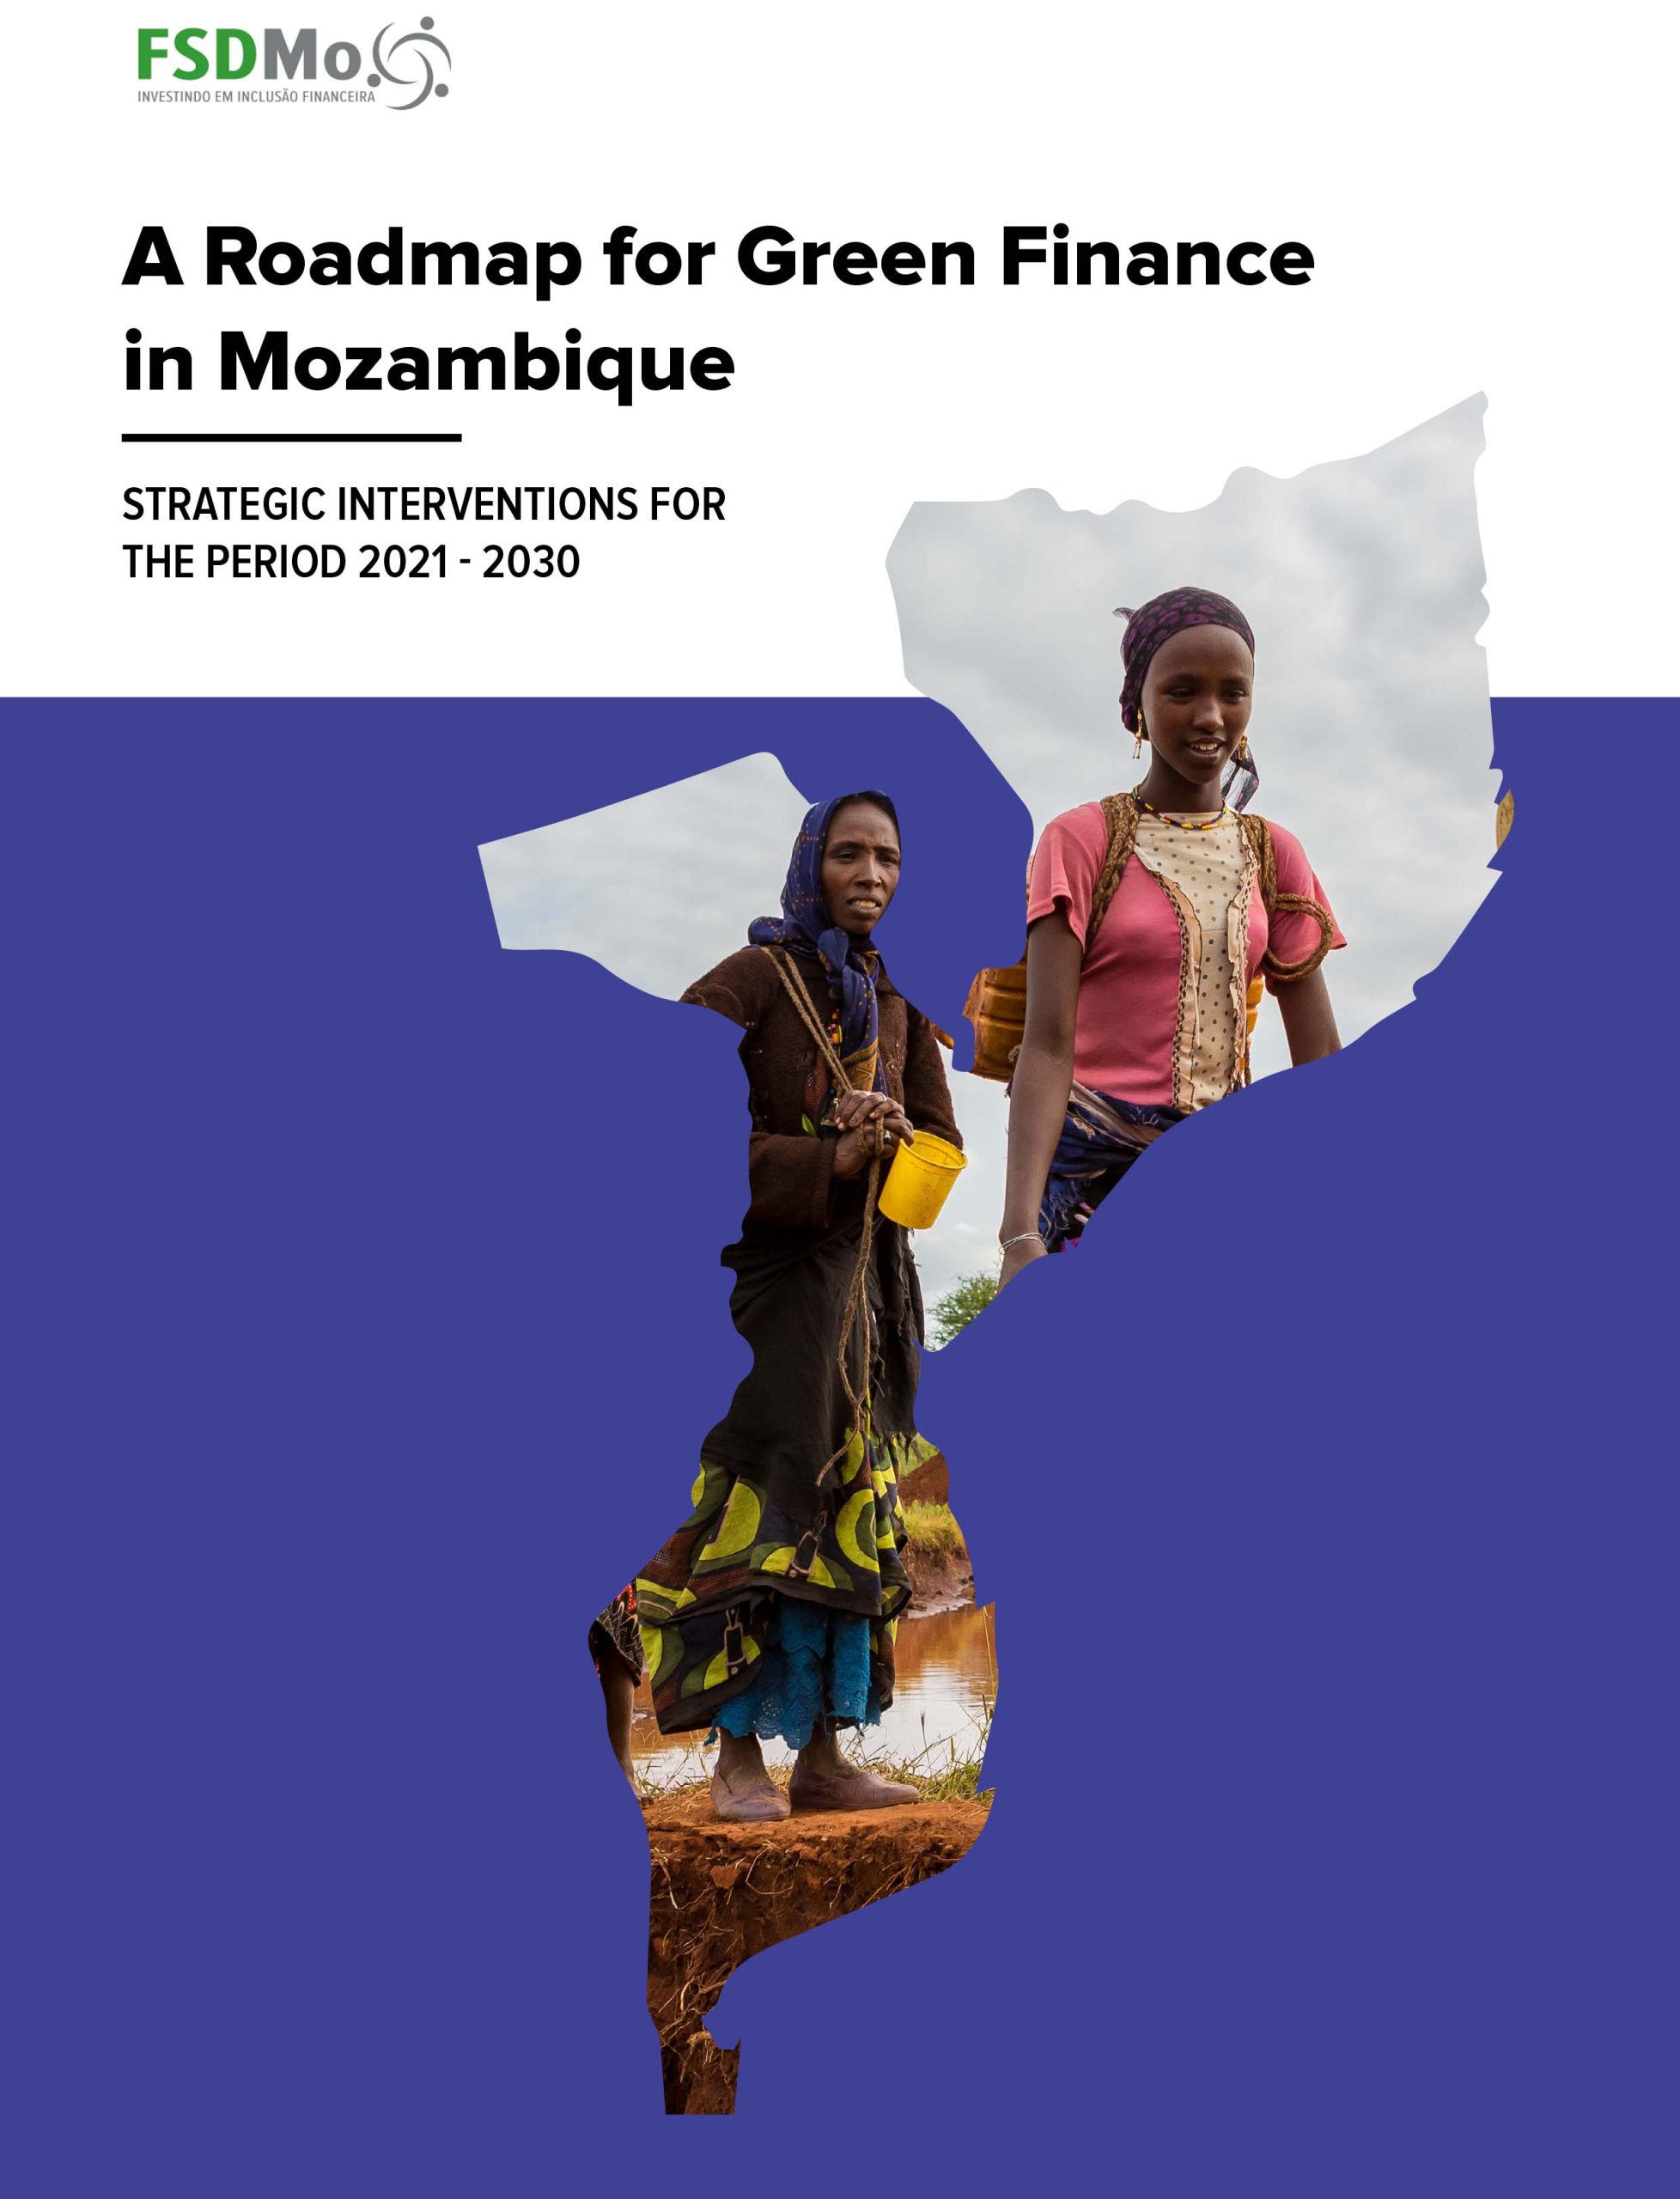 <!DOCTYPE html> <html lang="en"> <head>     <meta charset="UTF-8">     <meta name="viewport" content="width=device-width, initial-scale=1.0">     <title>A ROADMAP FOR GREEN FINANCE IN MOZAMBIQUE</title>     <style>         a {             color: #8FC73F;             text-decoration: none; /* Remove underline */             transition: color 0.3s; /* Smooth transition for color change */         }          a:hover {             color: #ffffff; /* Change color to white on hover */         }     </style> </head> <body>     <p><a href="https://www.fsdmoc.org.mz/wp-content/uploads/2023/06/A-Roadmap-for-Green-Finance-in-Mozambique_Final.pdf" target="_blank">A ROADMAP FOR GREEN FINANCE IN MOZAMBIQUE</a></p> </body> </html>